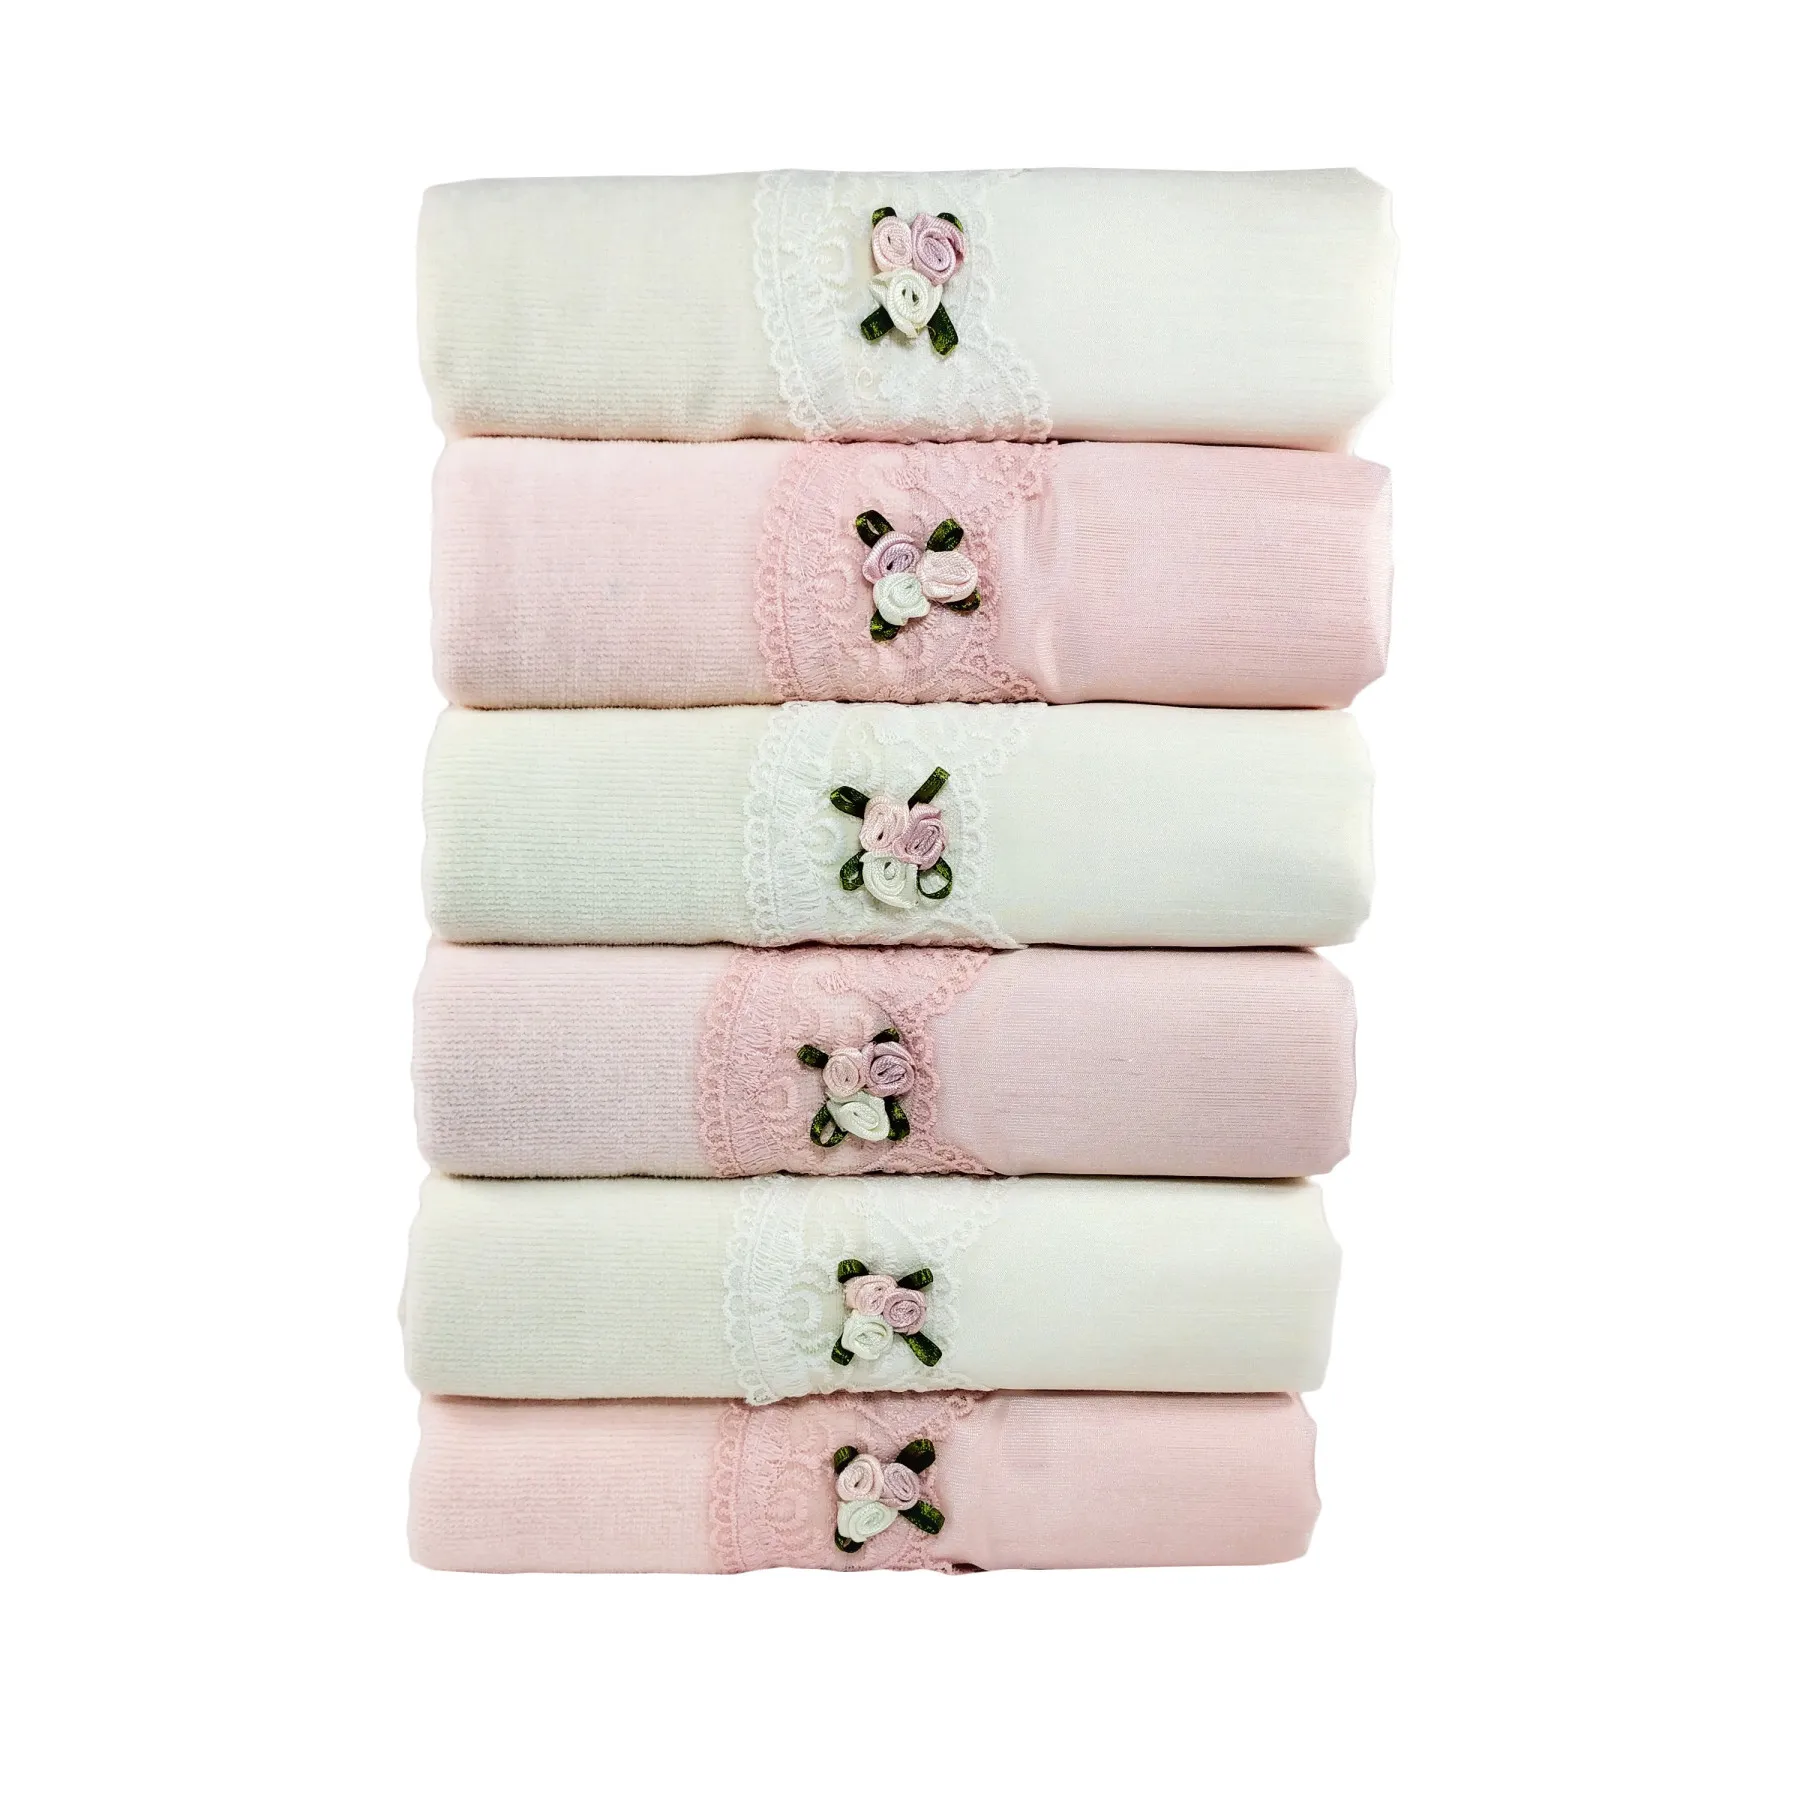 

Luxury 6pcs Towel Set Bathroom Embroidered 100% Cotton Soft From Turkey Bath Face Towels Absorbent For Home 50x90 Spa Sauna Gift